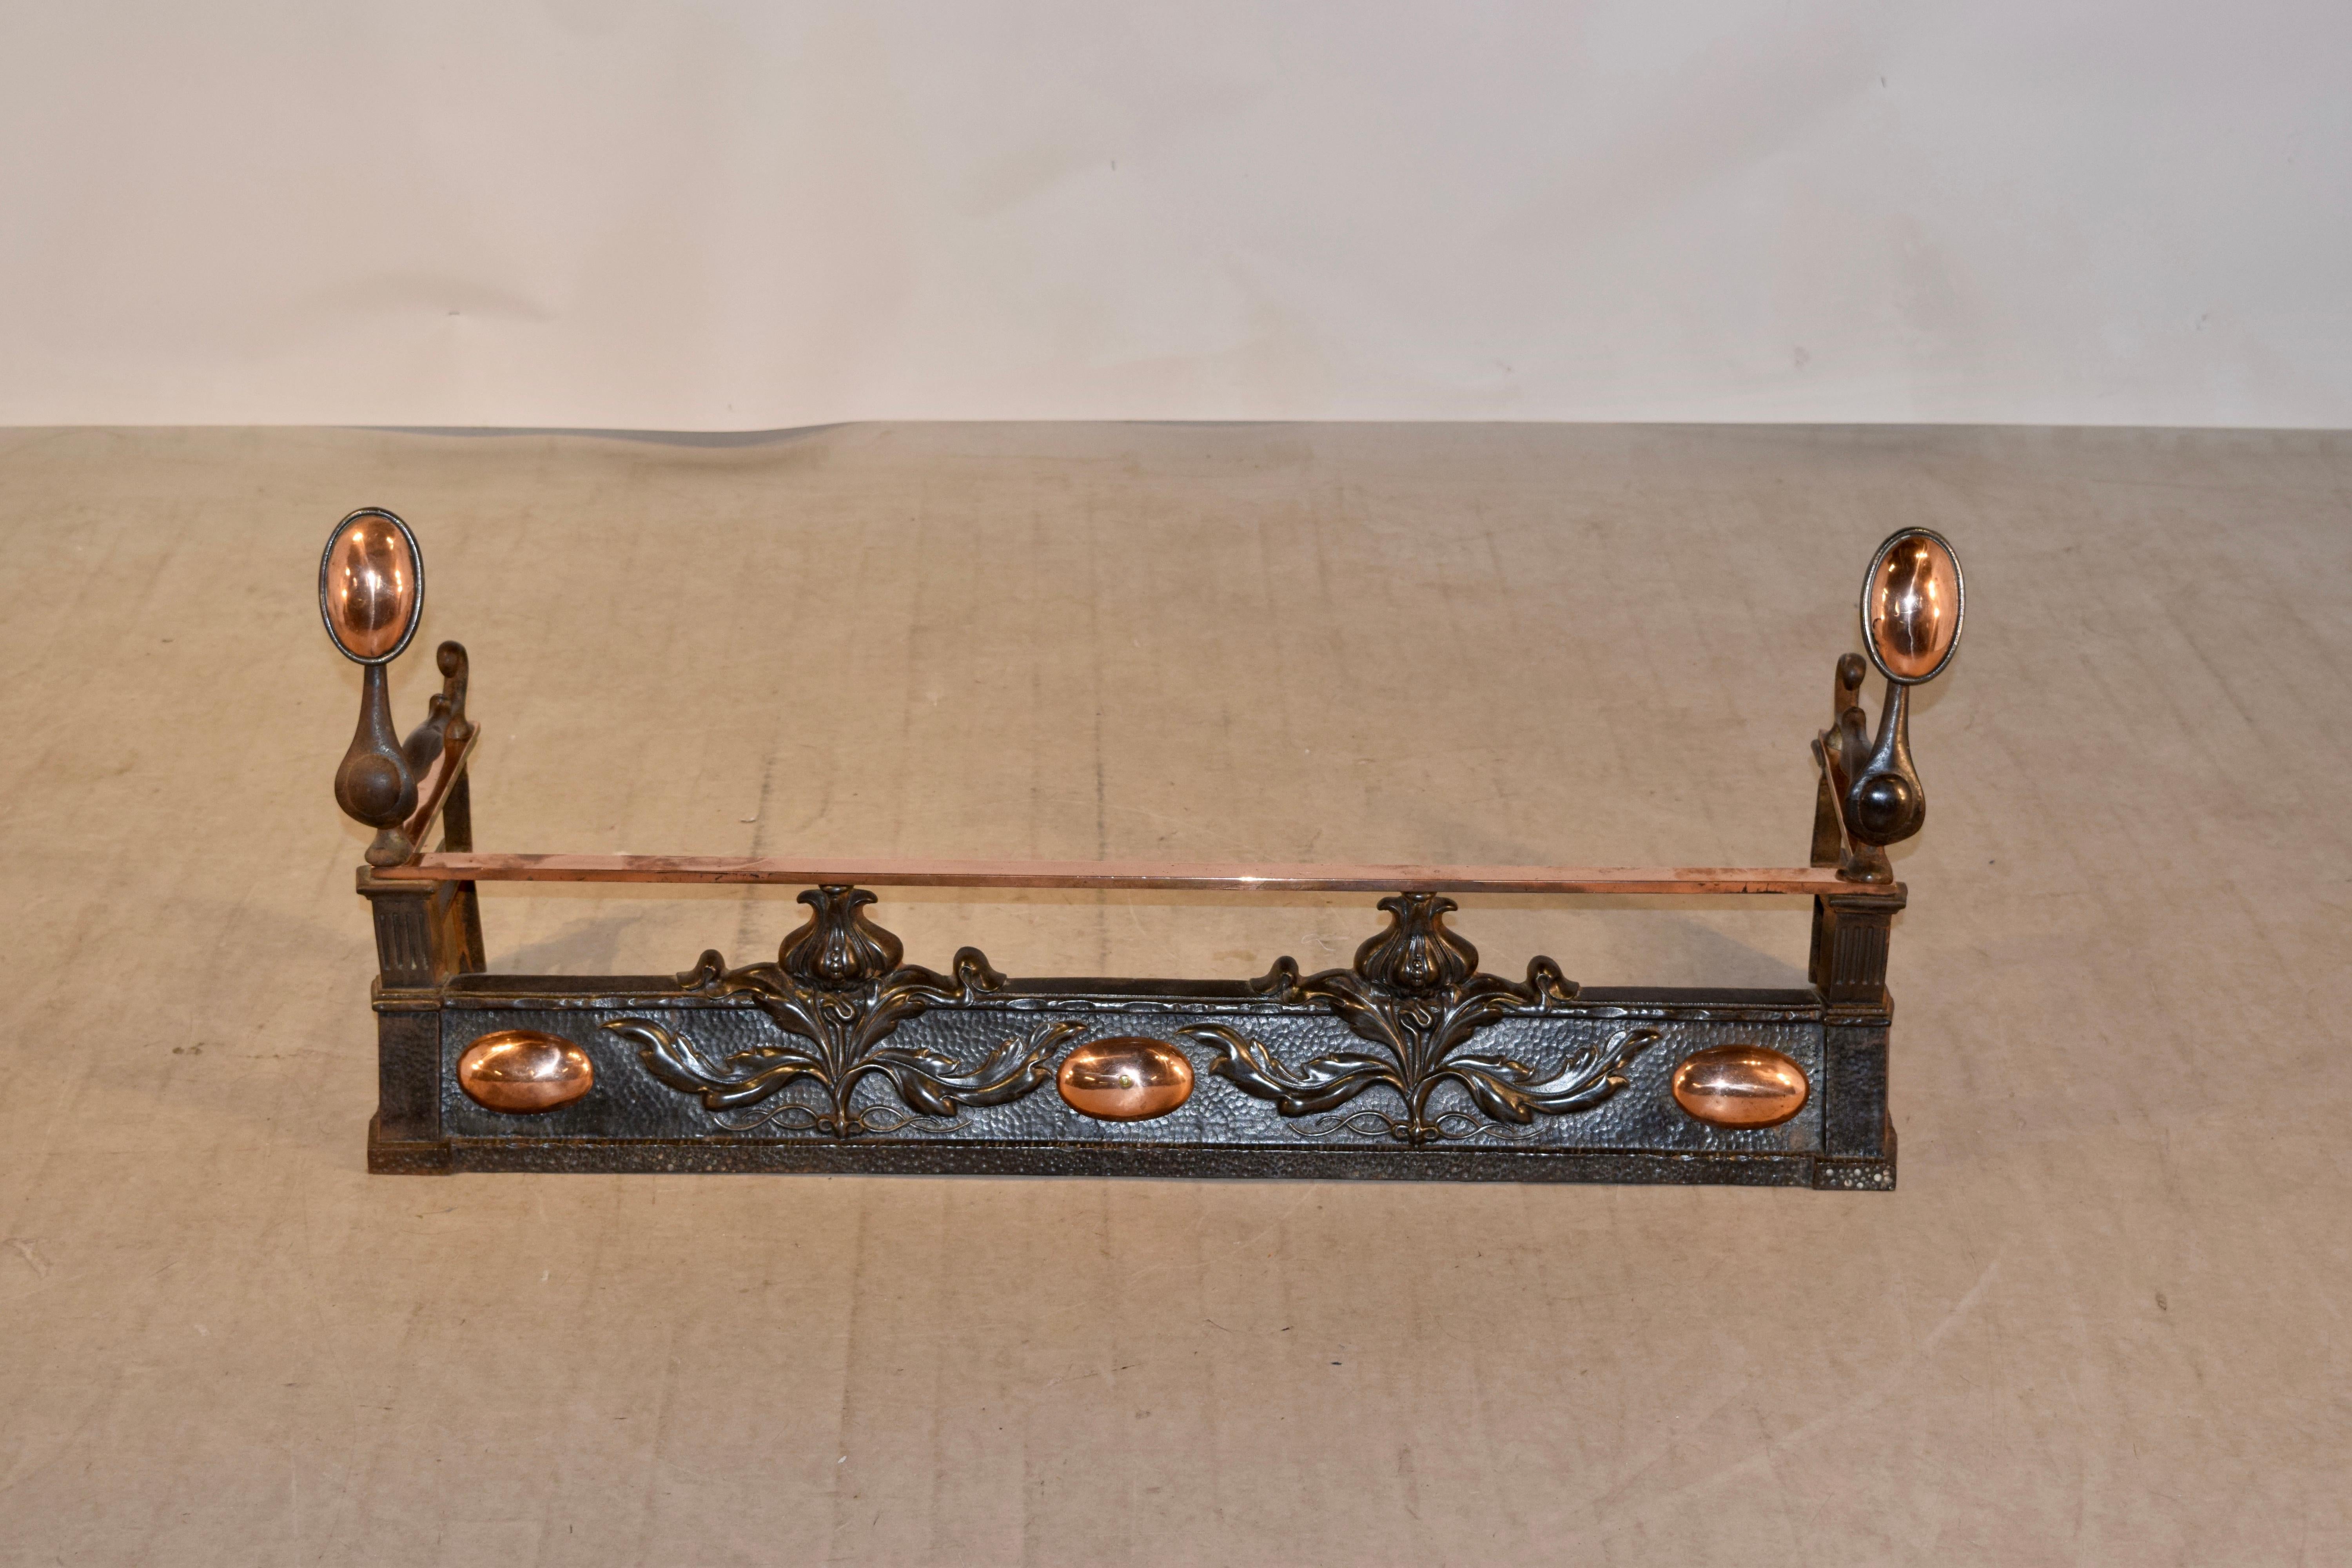 19th century fire fender from France made from iron and copper. The designs are Art Nouveau in style and are of lovely florals and are set off by brass medallions in between the florals. Makes a wonderful statement.